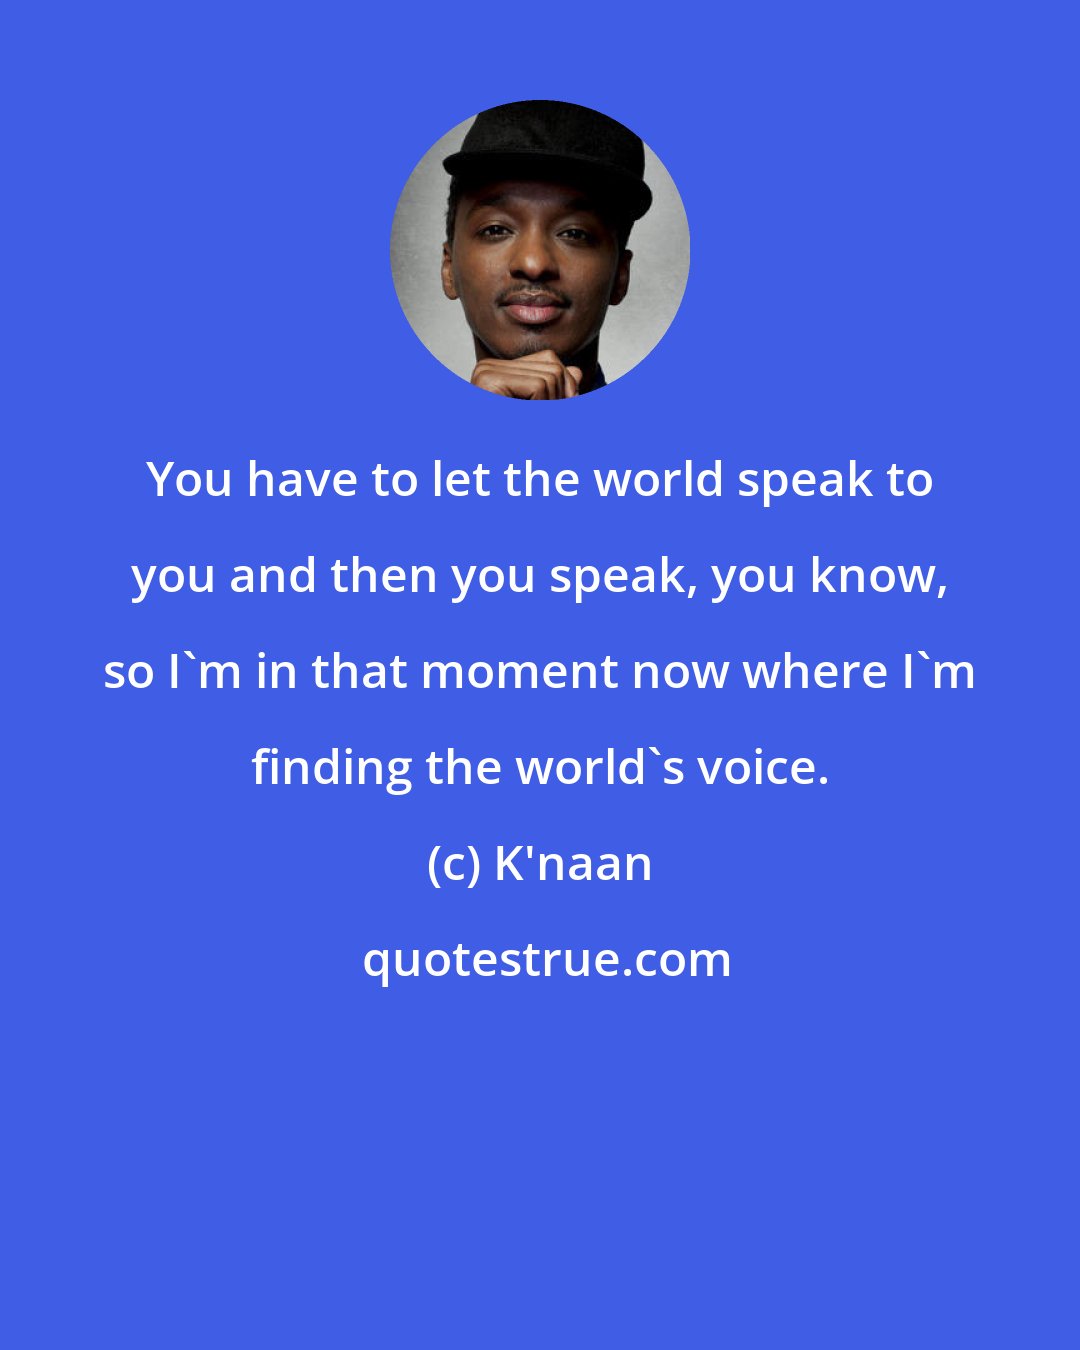 K'naan: You have to let the world speak to you and then you speak, you know, so I'm in that moment now where I'm finding the world's voice.